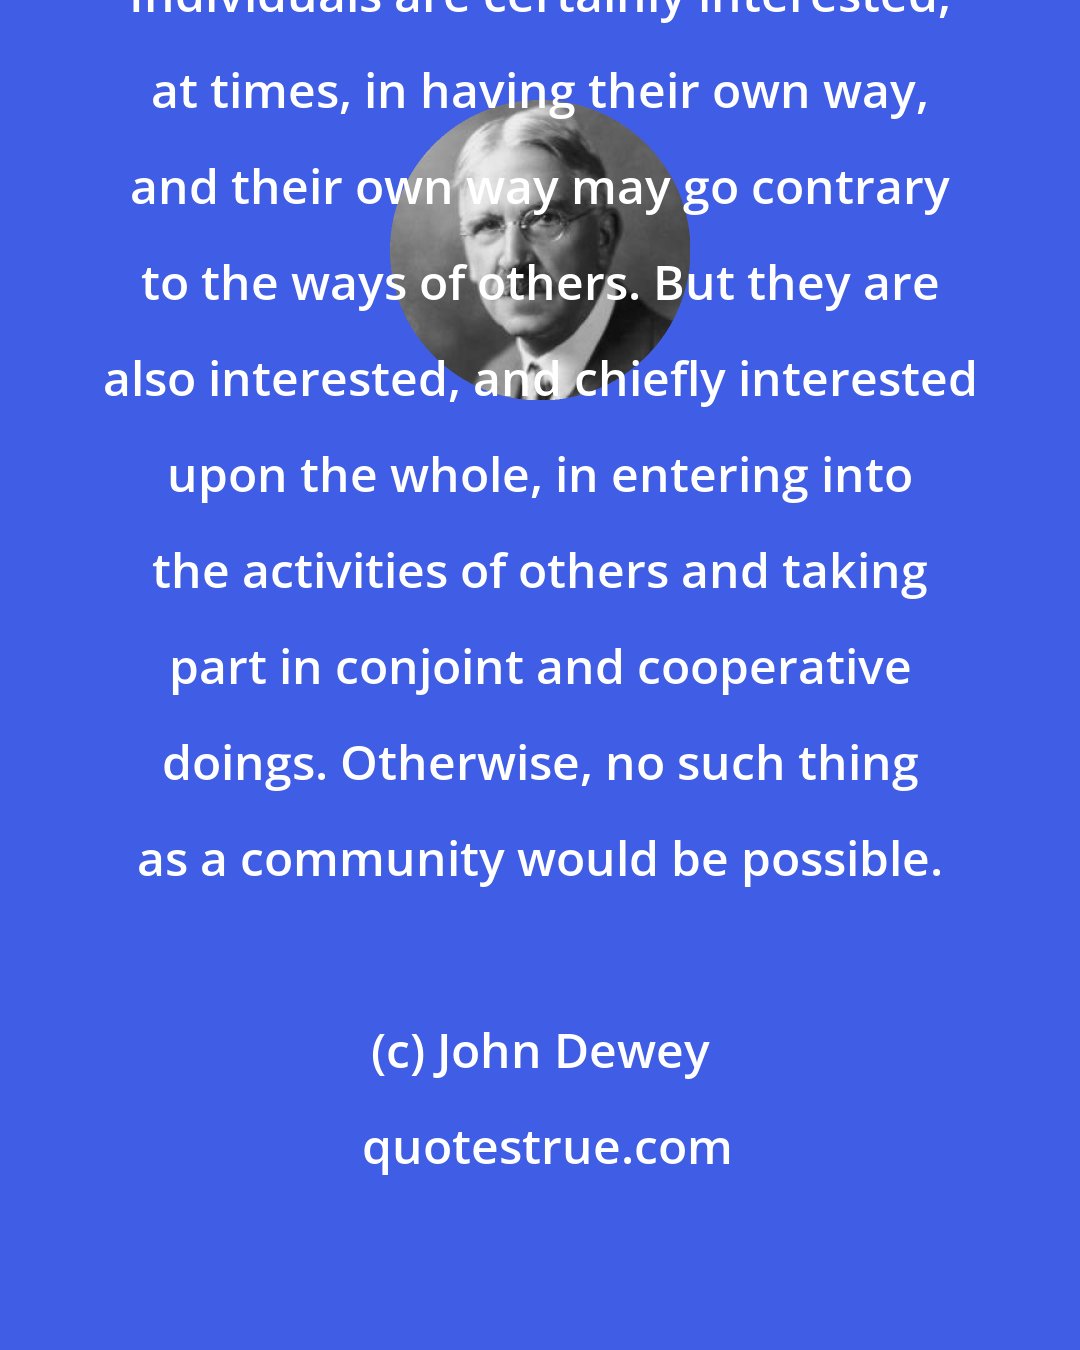 John Dewey: Individuals are certainly interested, at times, in having their own way, and their own way may go contrary to the ways of others. But they are also interested, and chiefly interested upon the whole, in entering into the activities of others and taking part in conjoint and cooperative doings. Otherwise, no such thing as a community would be possible.